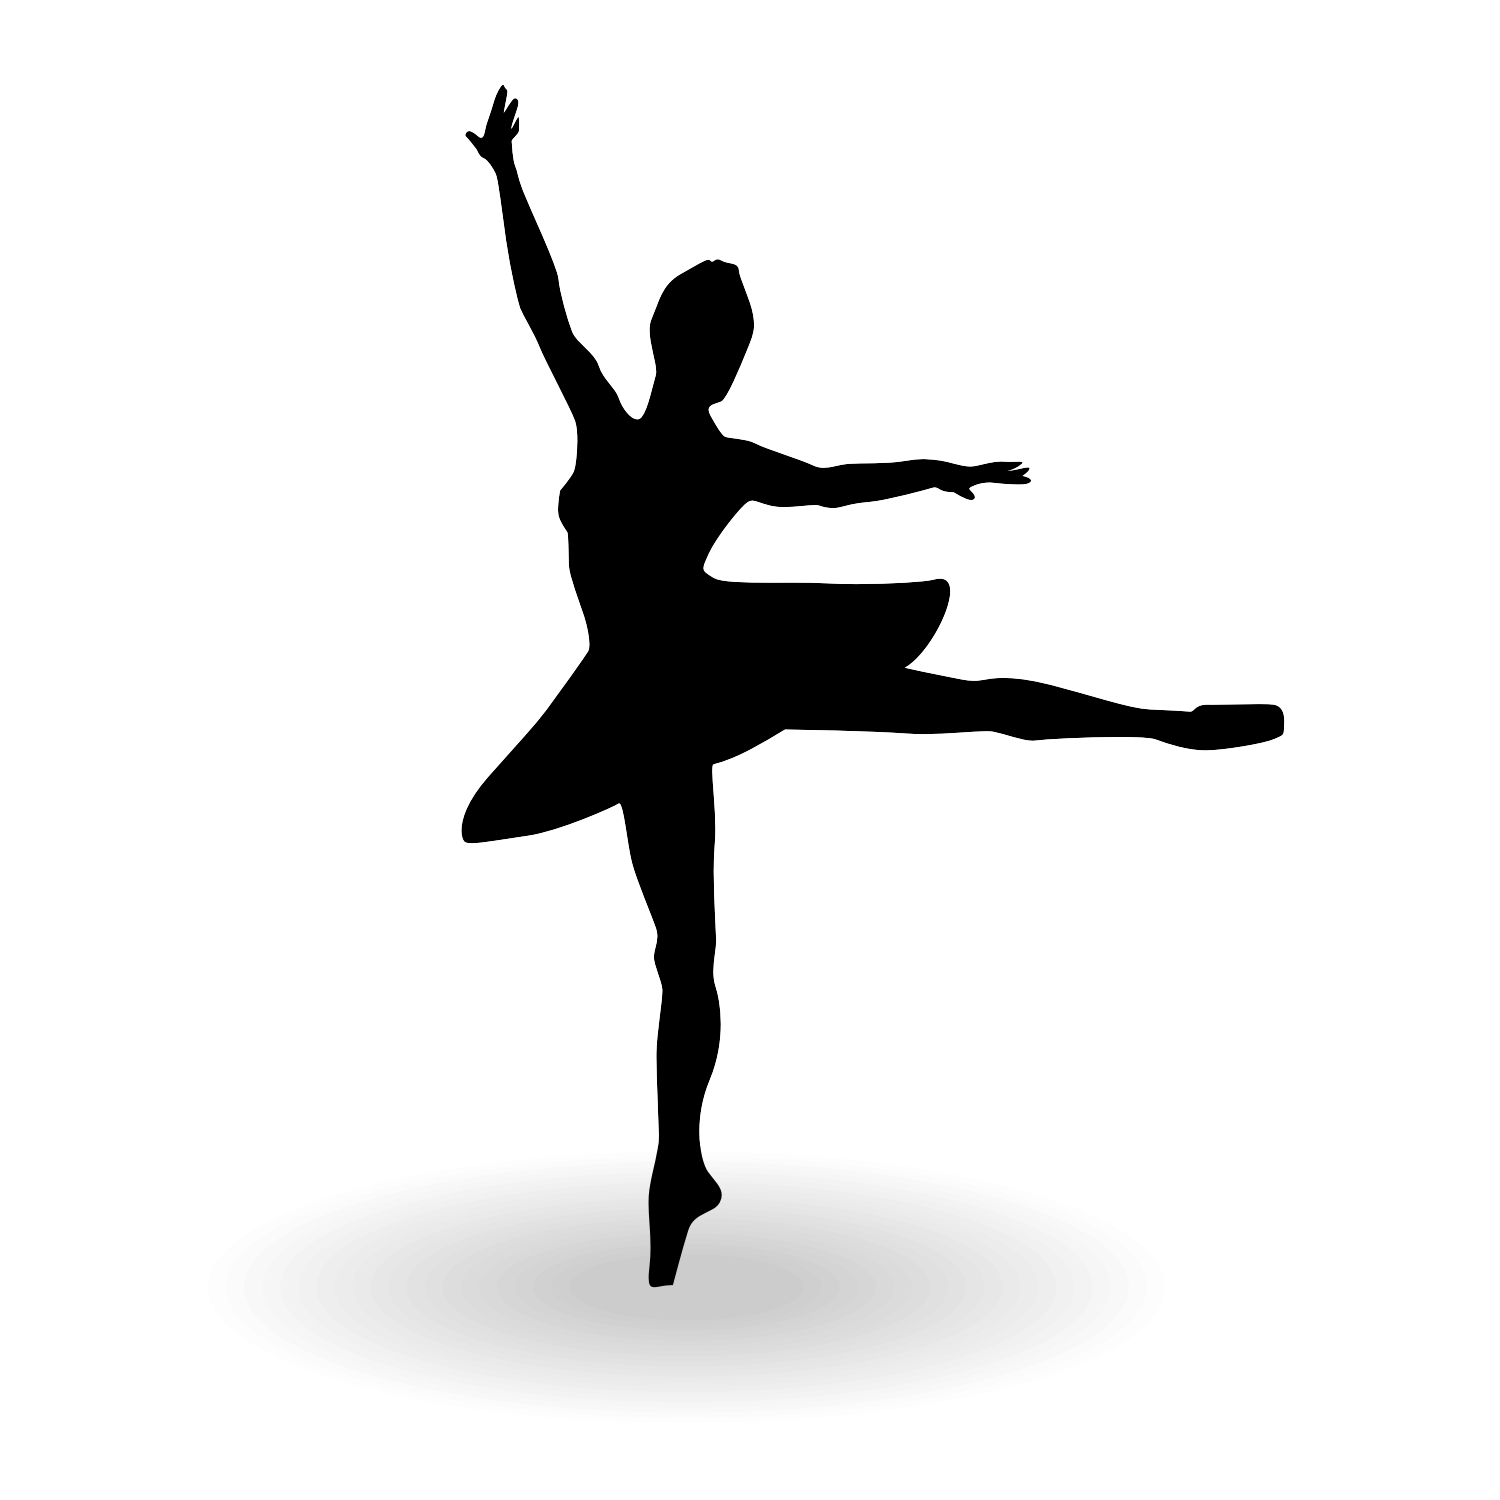 Ballerina Silhouette   Clipart Panda   Free Clipart Images